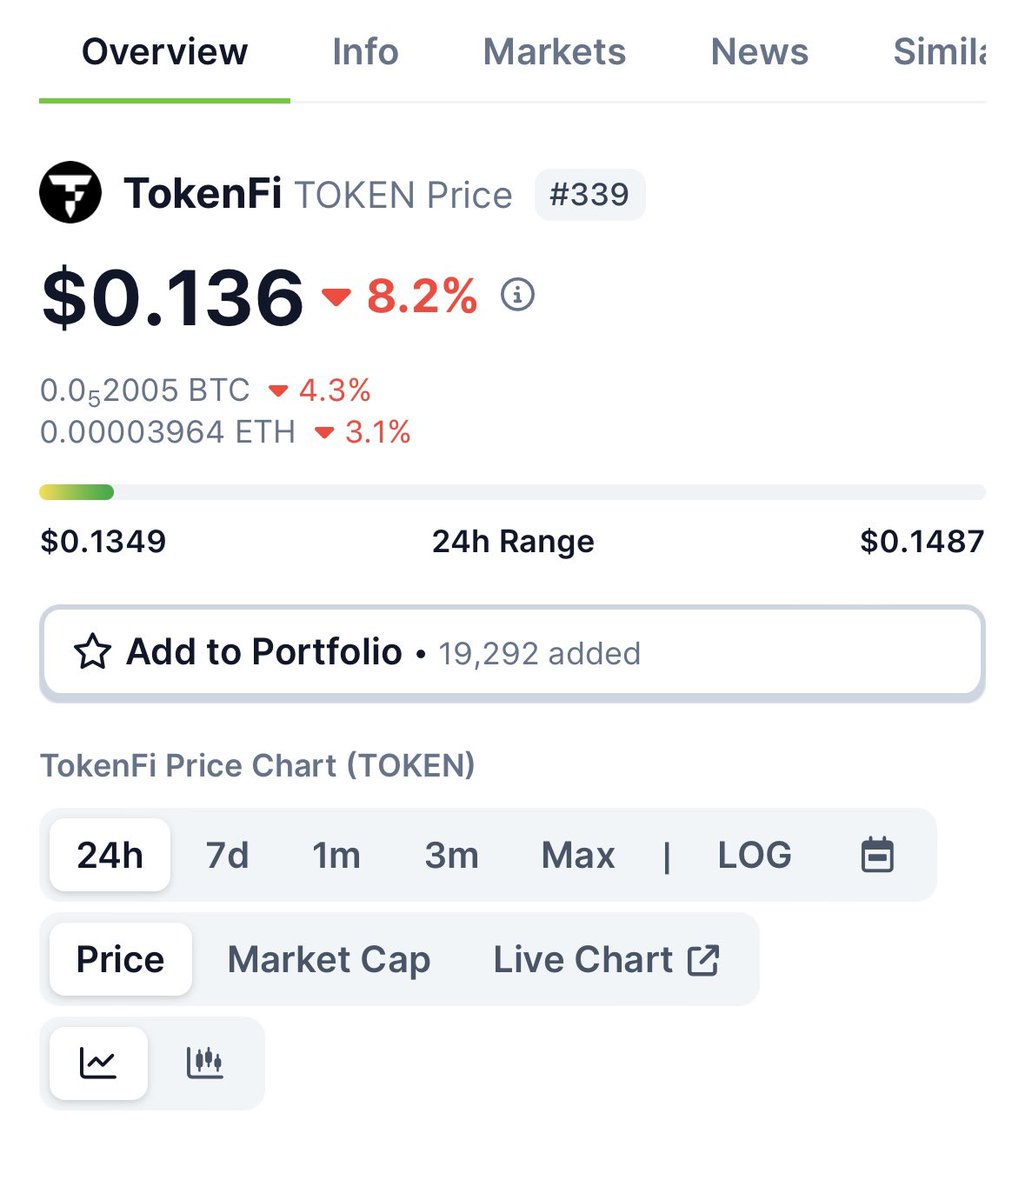 Another opportunity to BUY #TOKENFI before the big RUN starts.